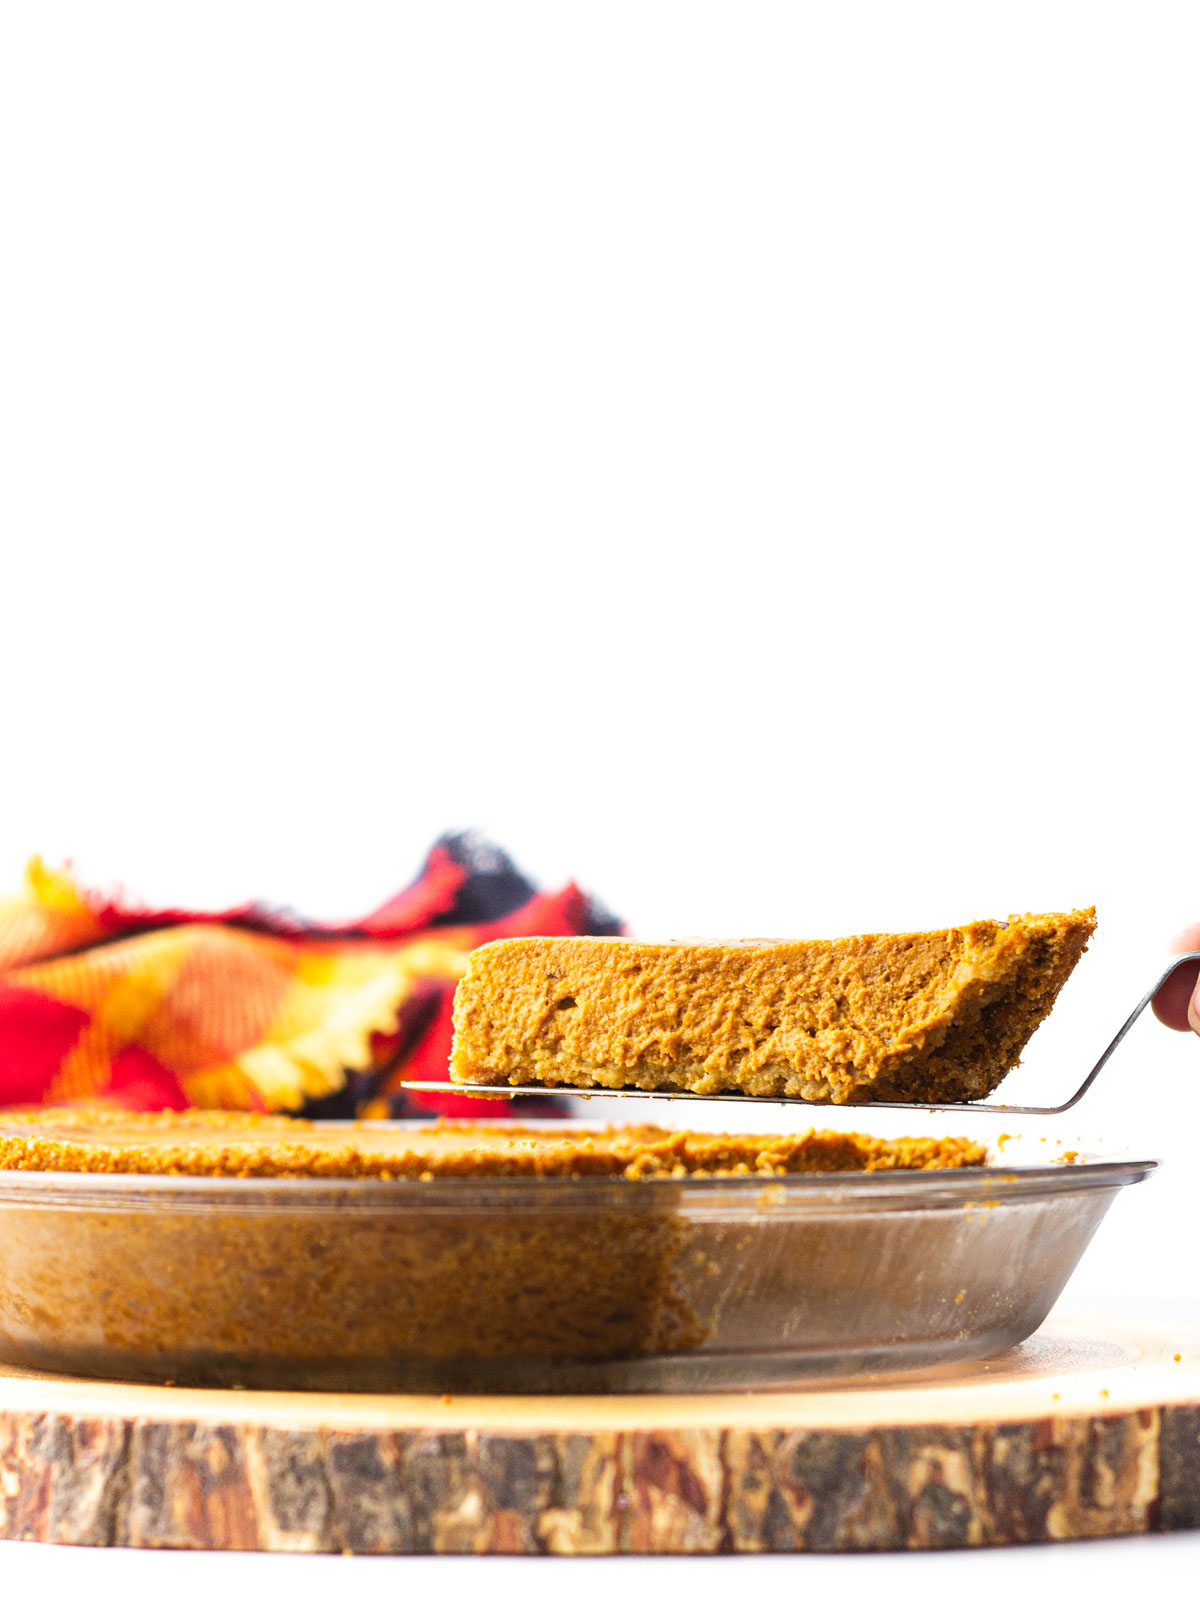 A slice of pumpkin pie being lifted out of the glass pie dish which is sitting on a round piece of wood.